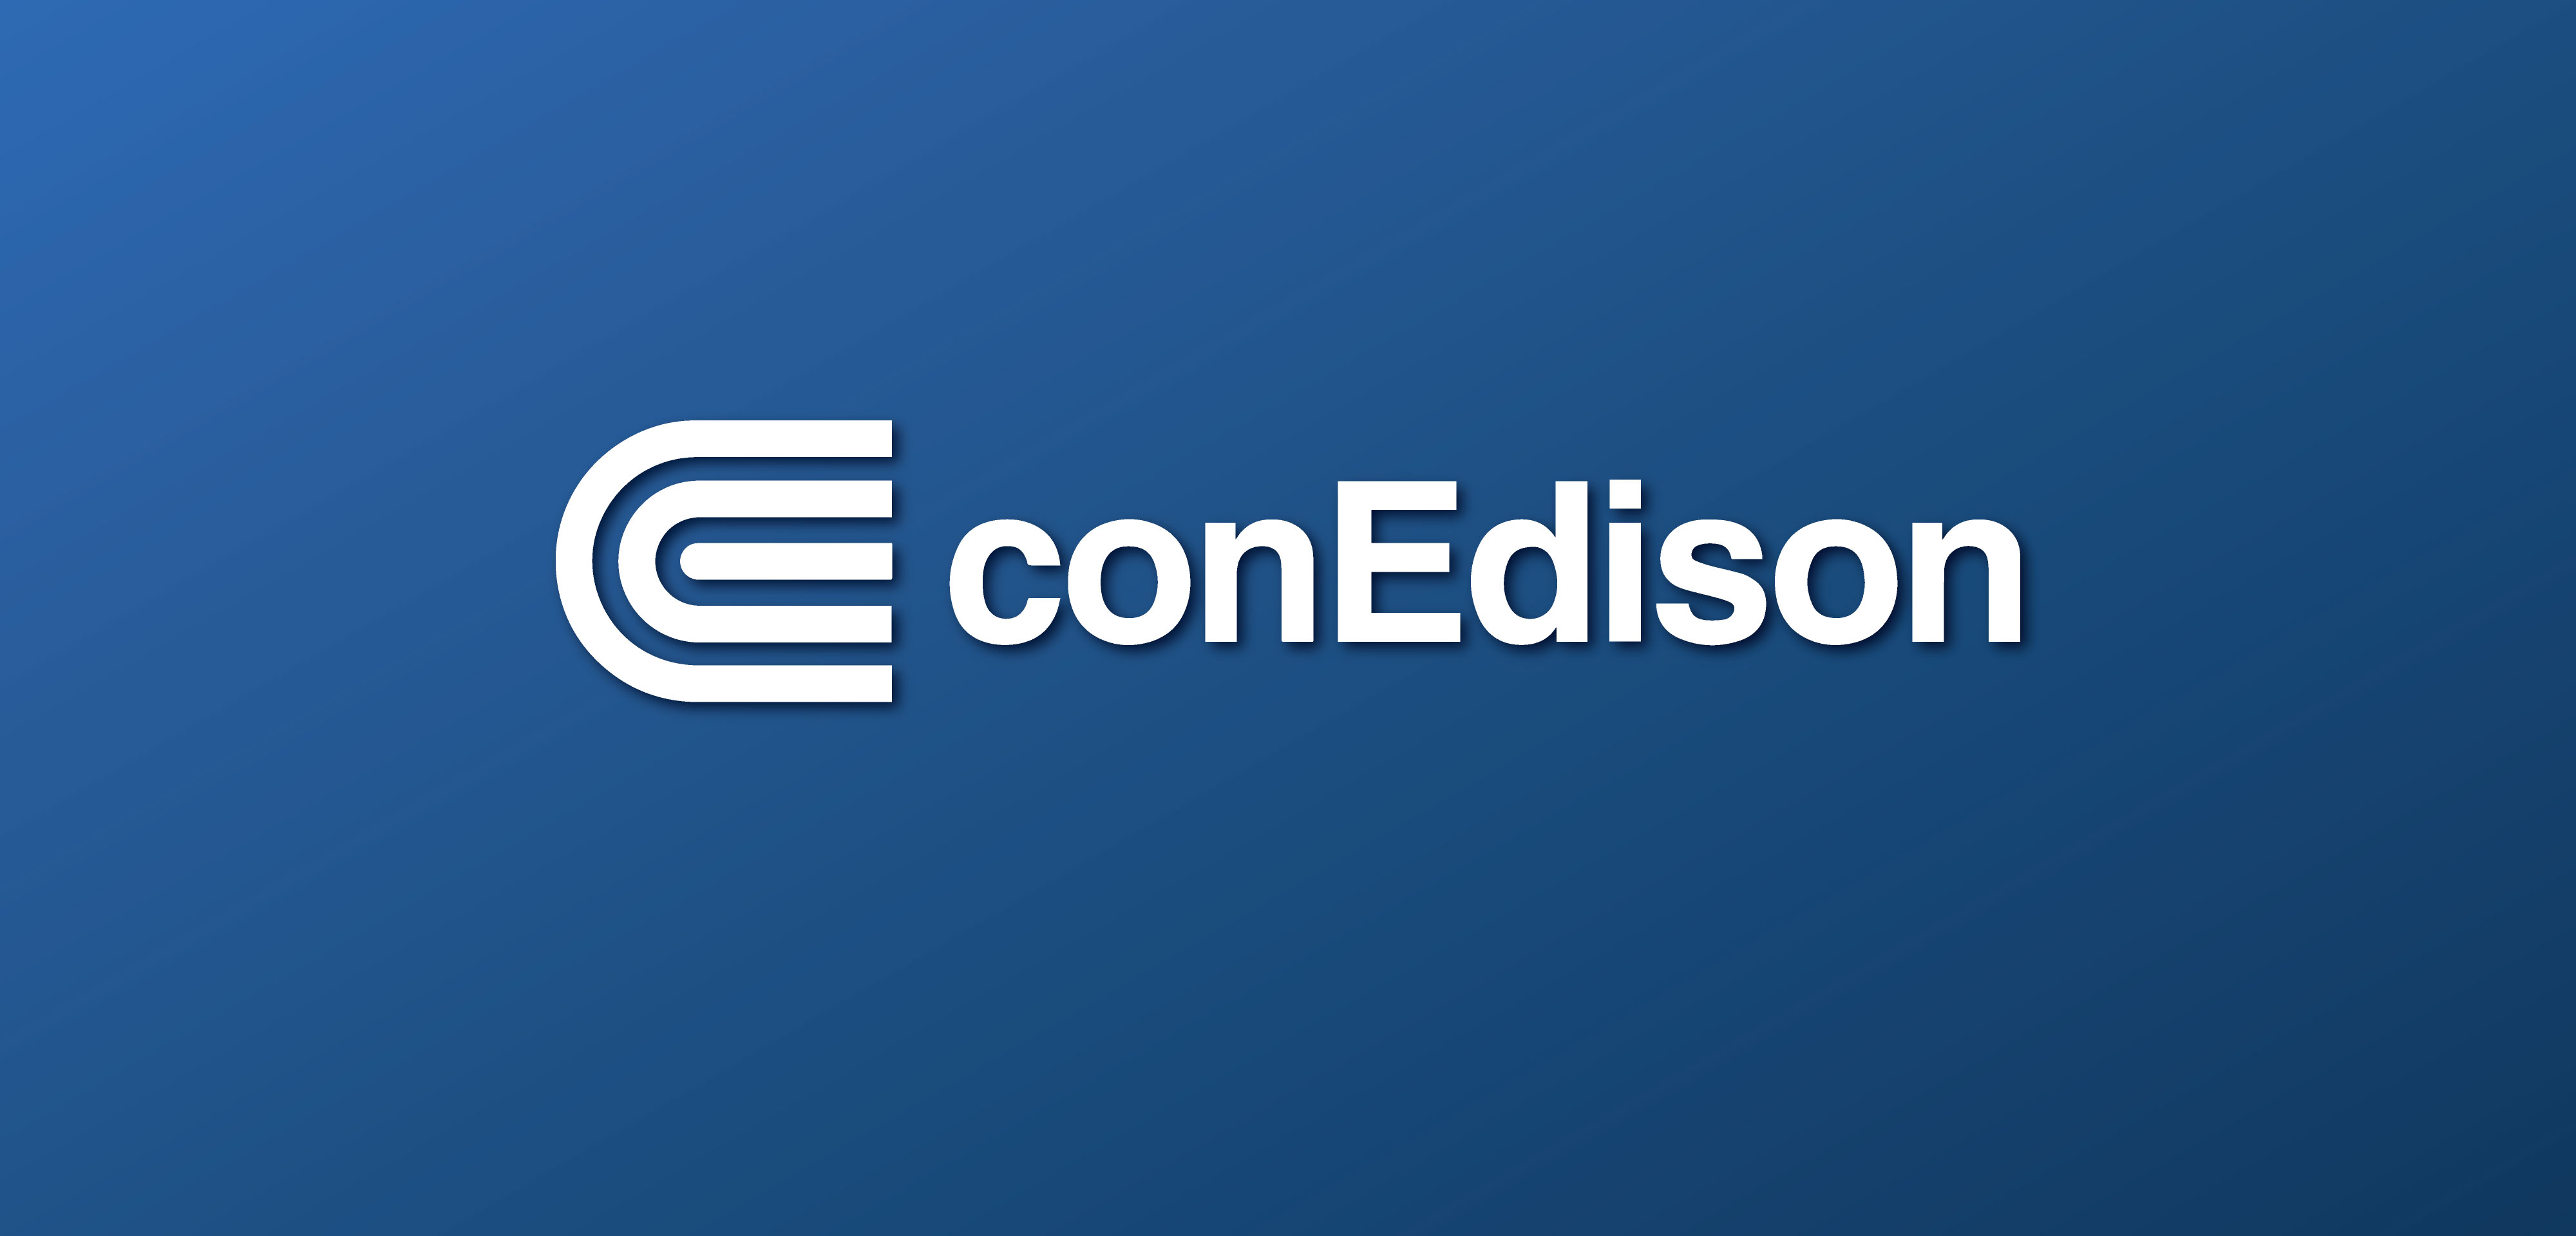 New Yorkers’ guide to going solar with Con Edison